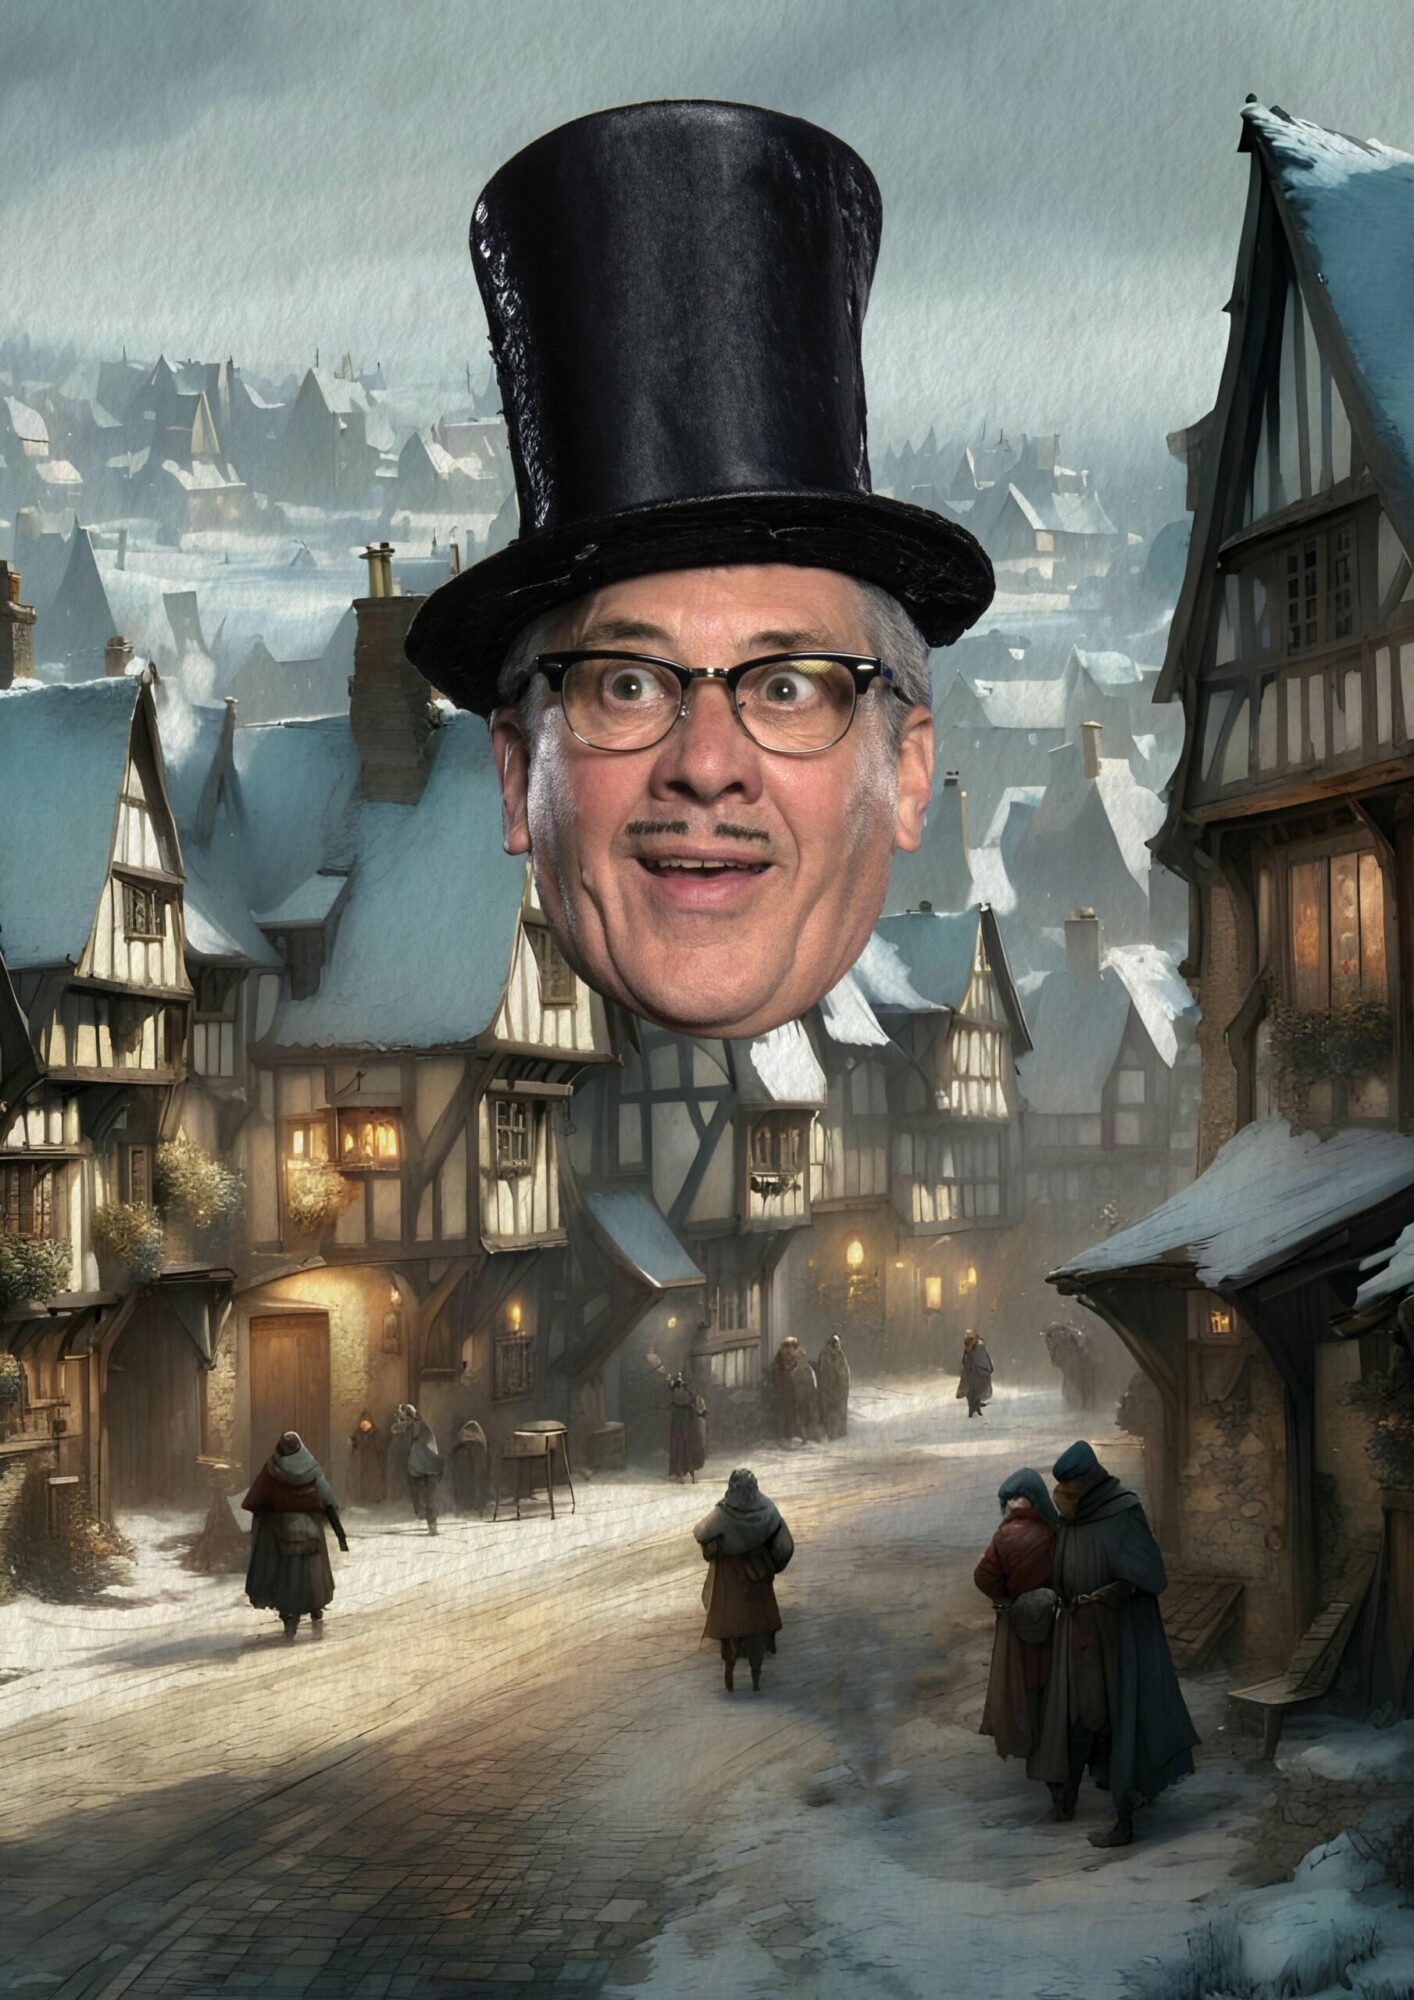 Image name Count Arthur Strong Is Charles Dickens In a Christmas Carol at The Forum Northallerton Northallerton scaled the 3 image from the post Count Arthur Strong - ...and It's Goodnight From Him at Cast Doncaster, Doncaster in Yorkshire.com.